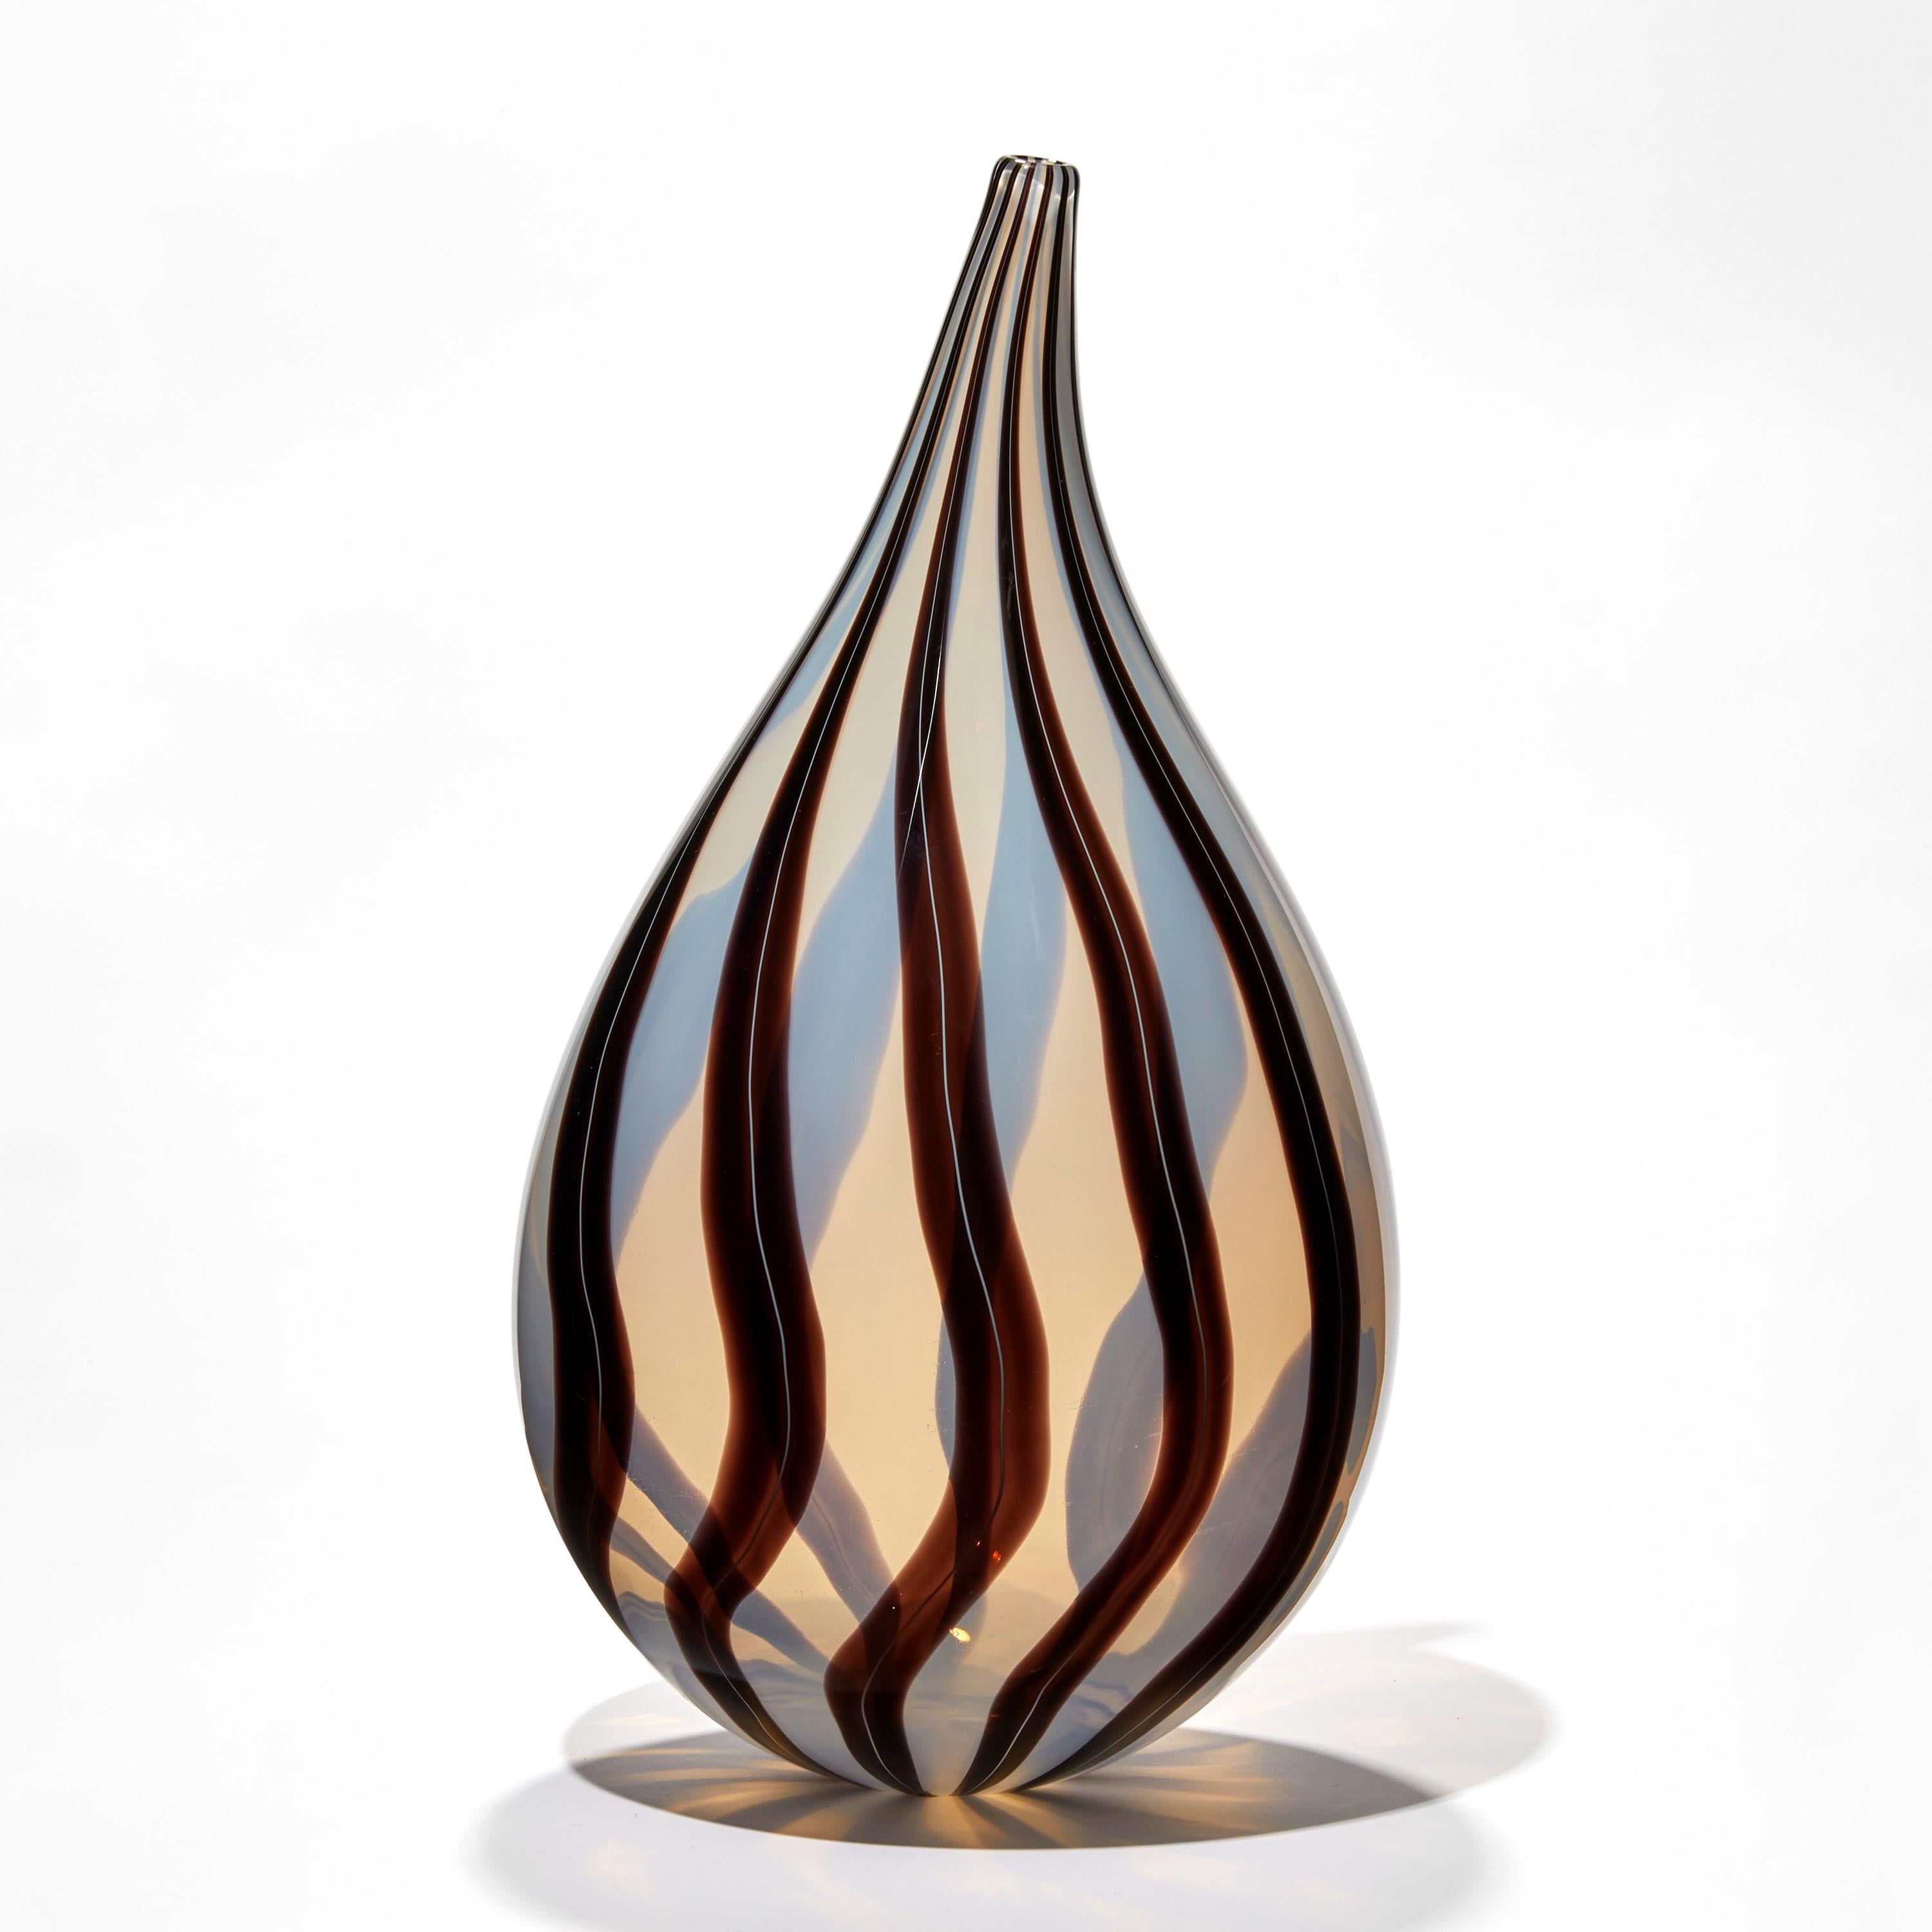 Stripes III is a unique handblown opaque white and dark aubergine glass sculpture by the Swedish artist Ann Wåhlström. Created to form an elegant teardrop shape, finishing in a refined thin neck, canes of dark coloured glass appear woven into the